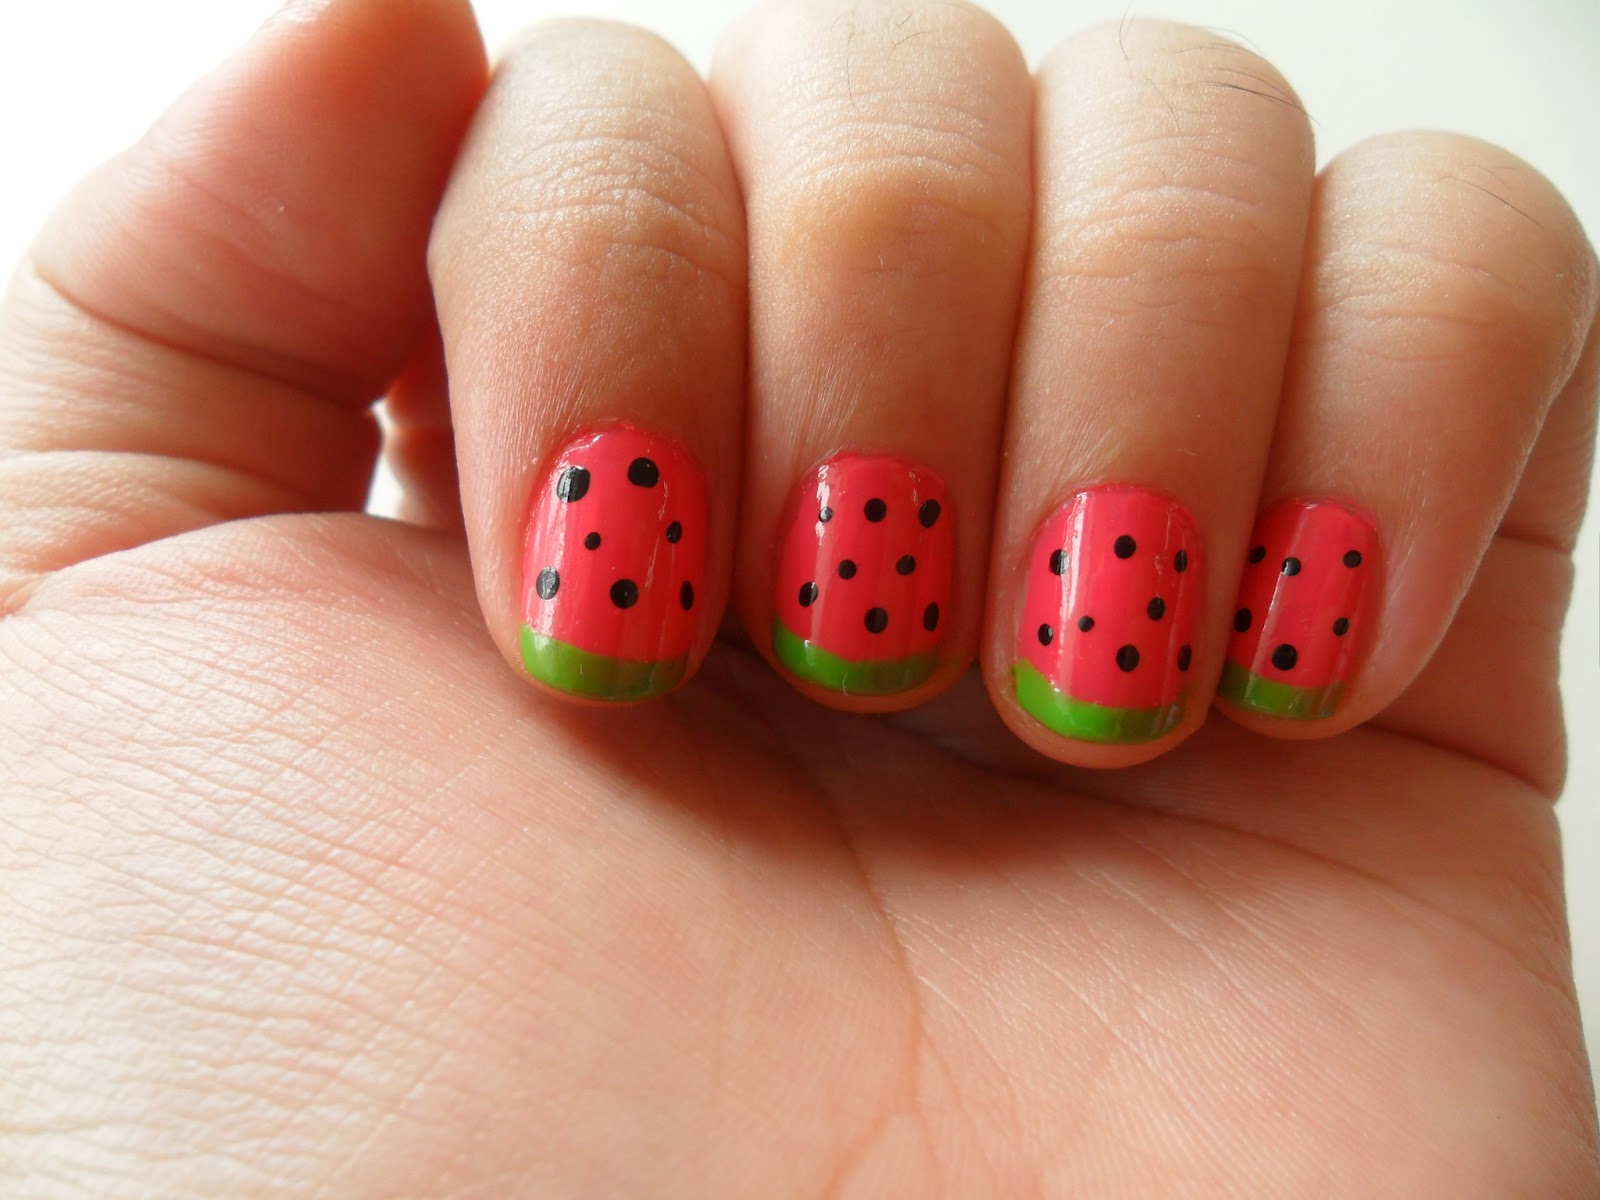 6. Watermelon Nails - wide 2